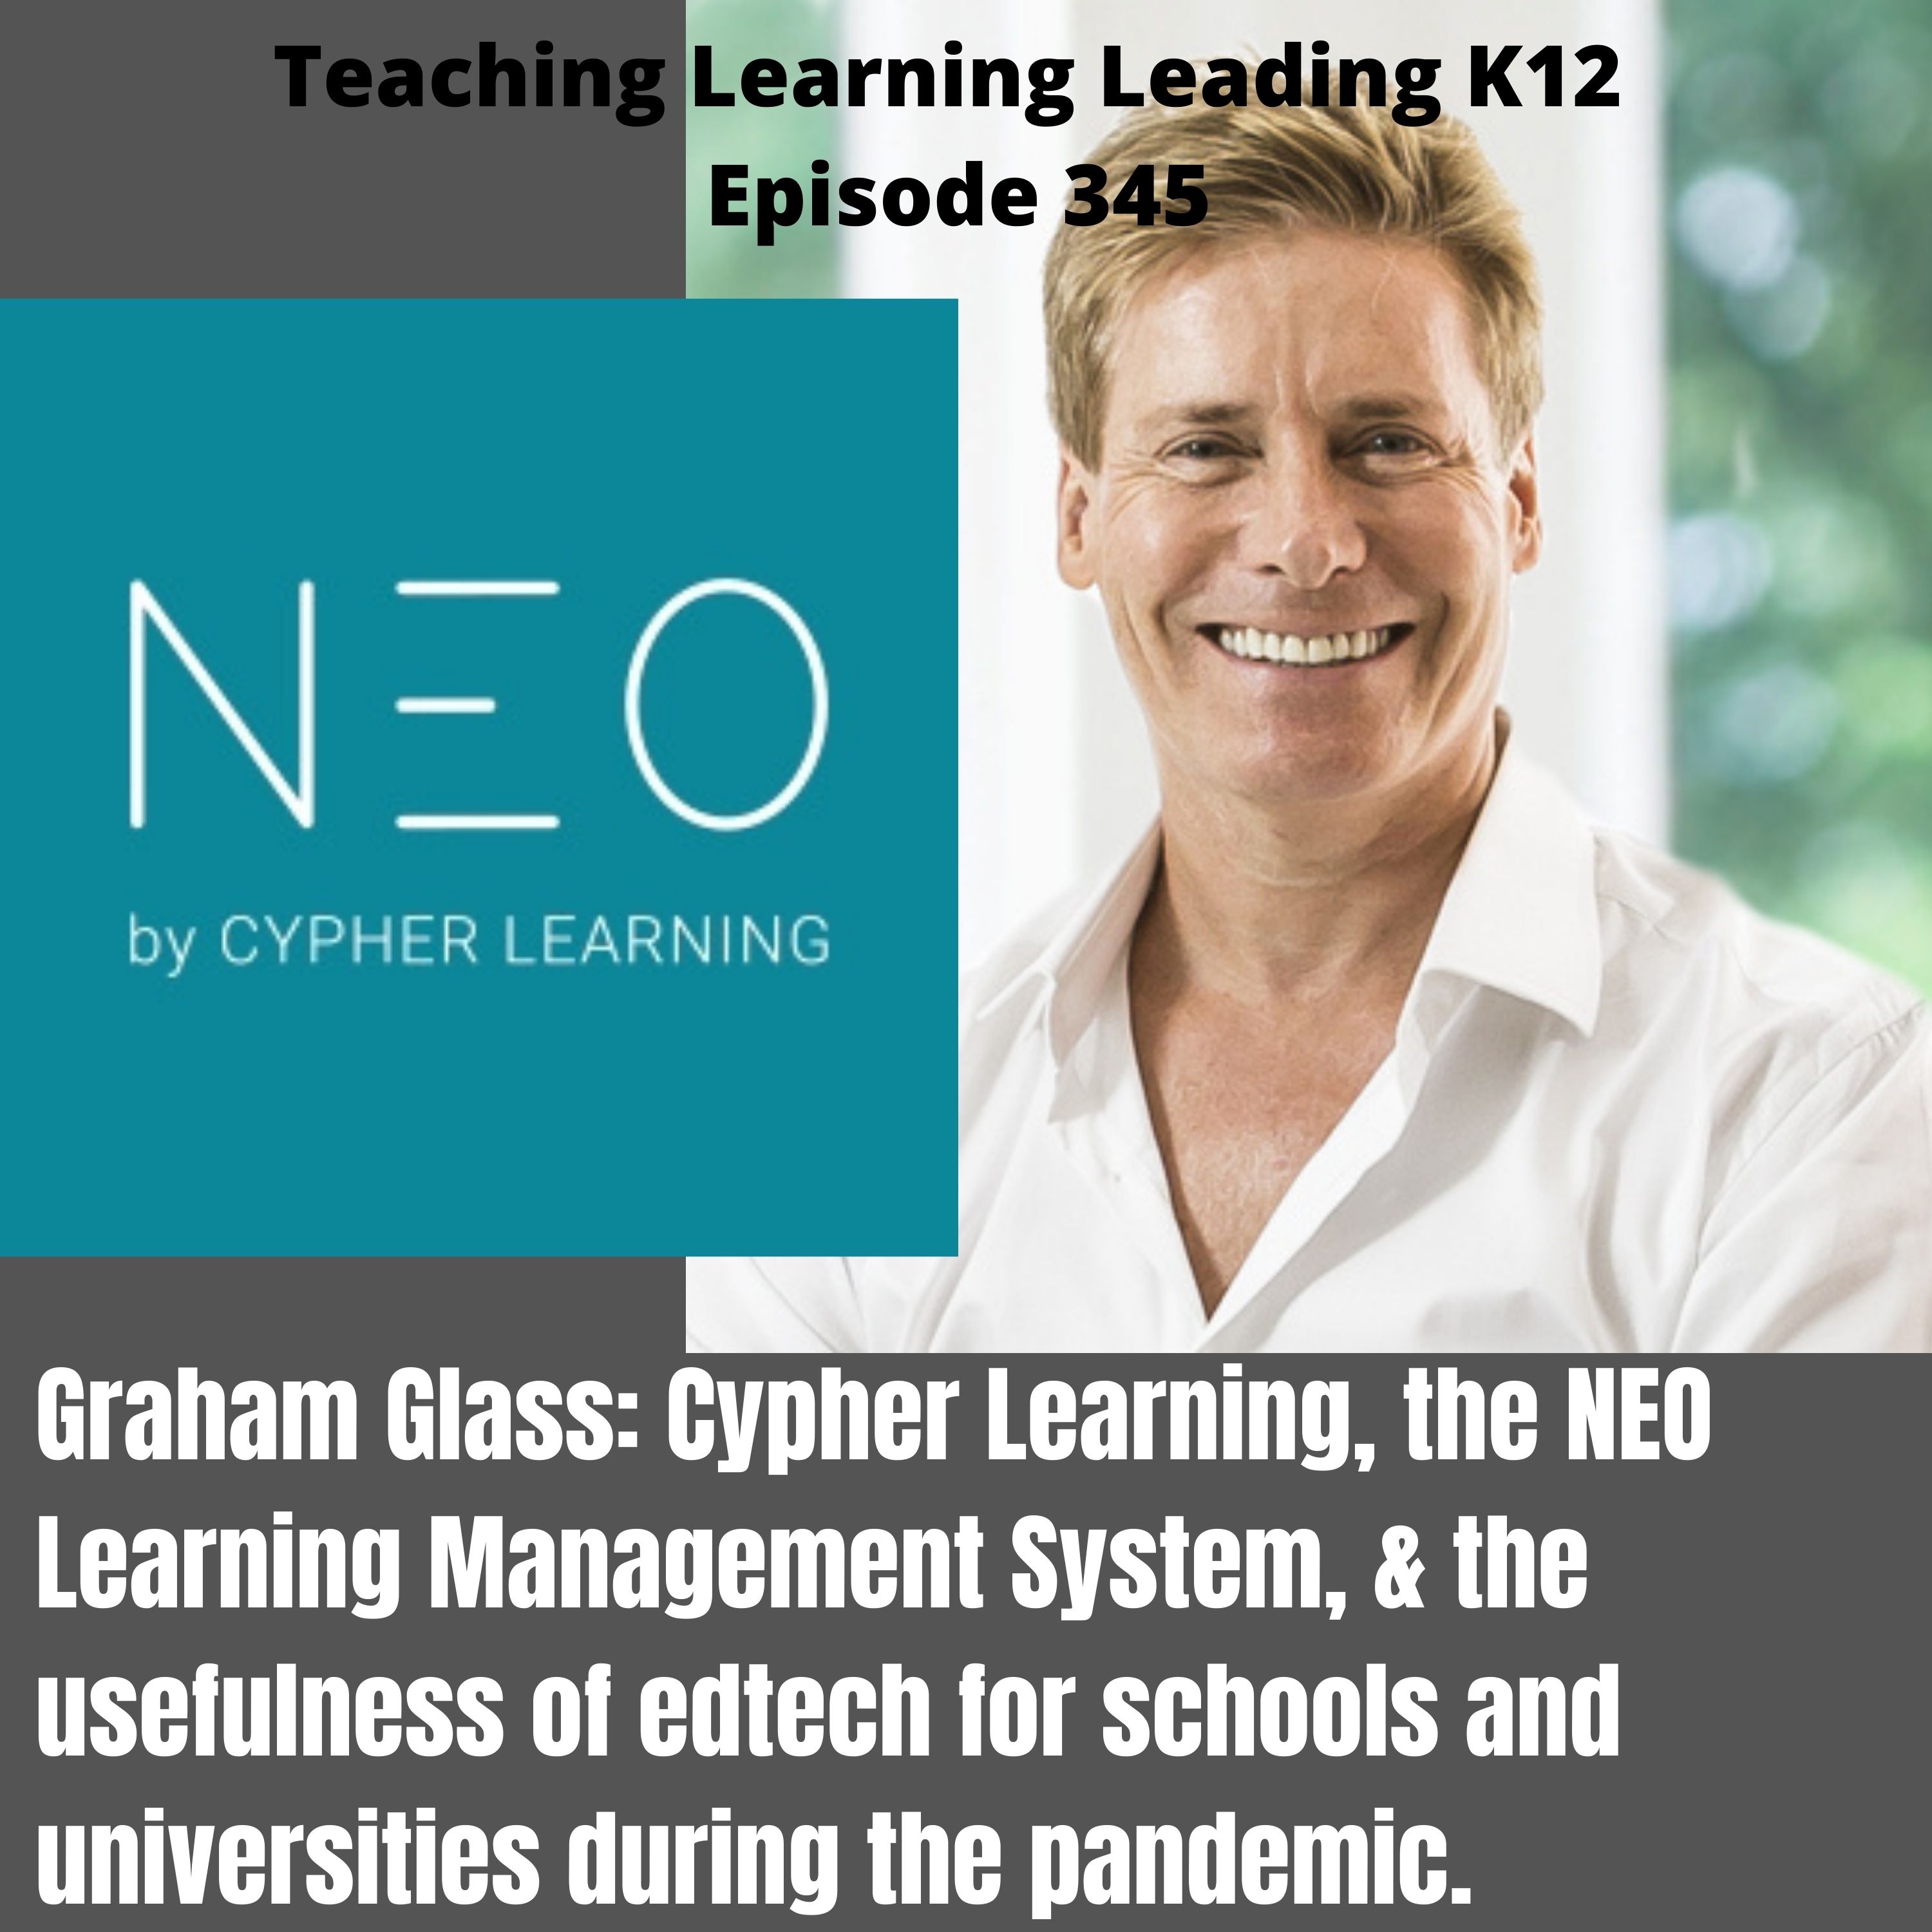 Graham Glass: Cypher Learning, the NEO Learning Management System, and the Usefulness of Edtech During the Pandemic - 345